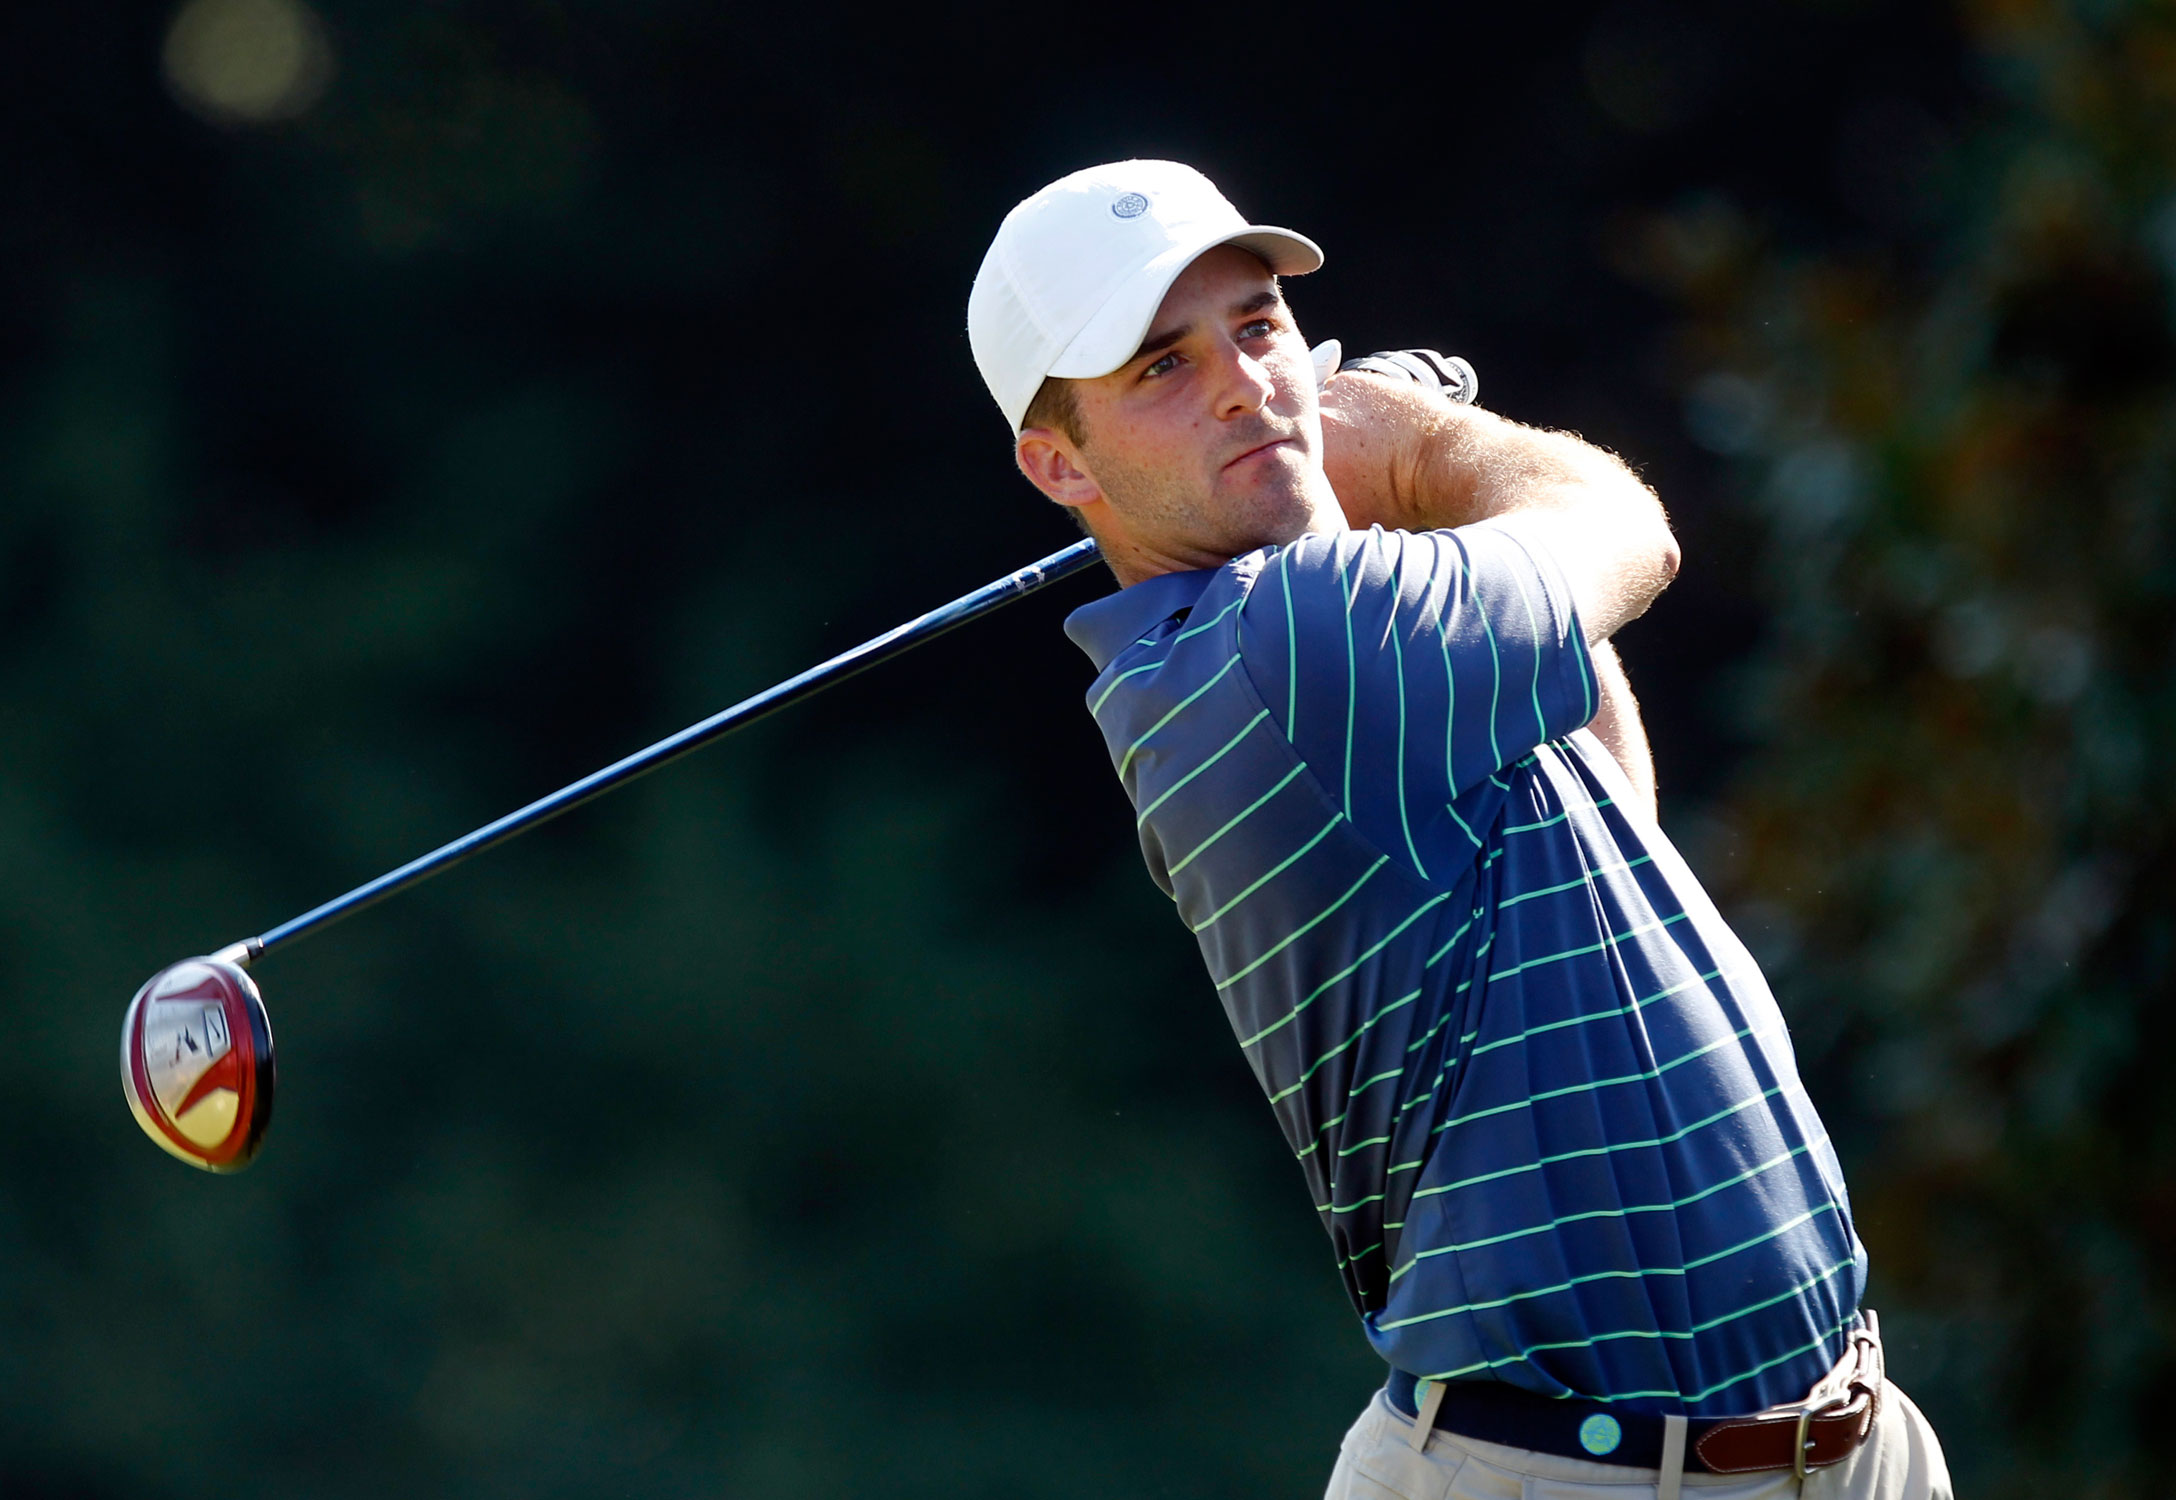 UVa’s Denny McCarthy leads amateur hour at U.S. Open